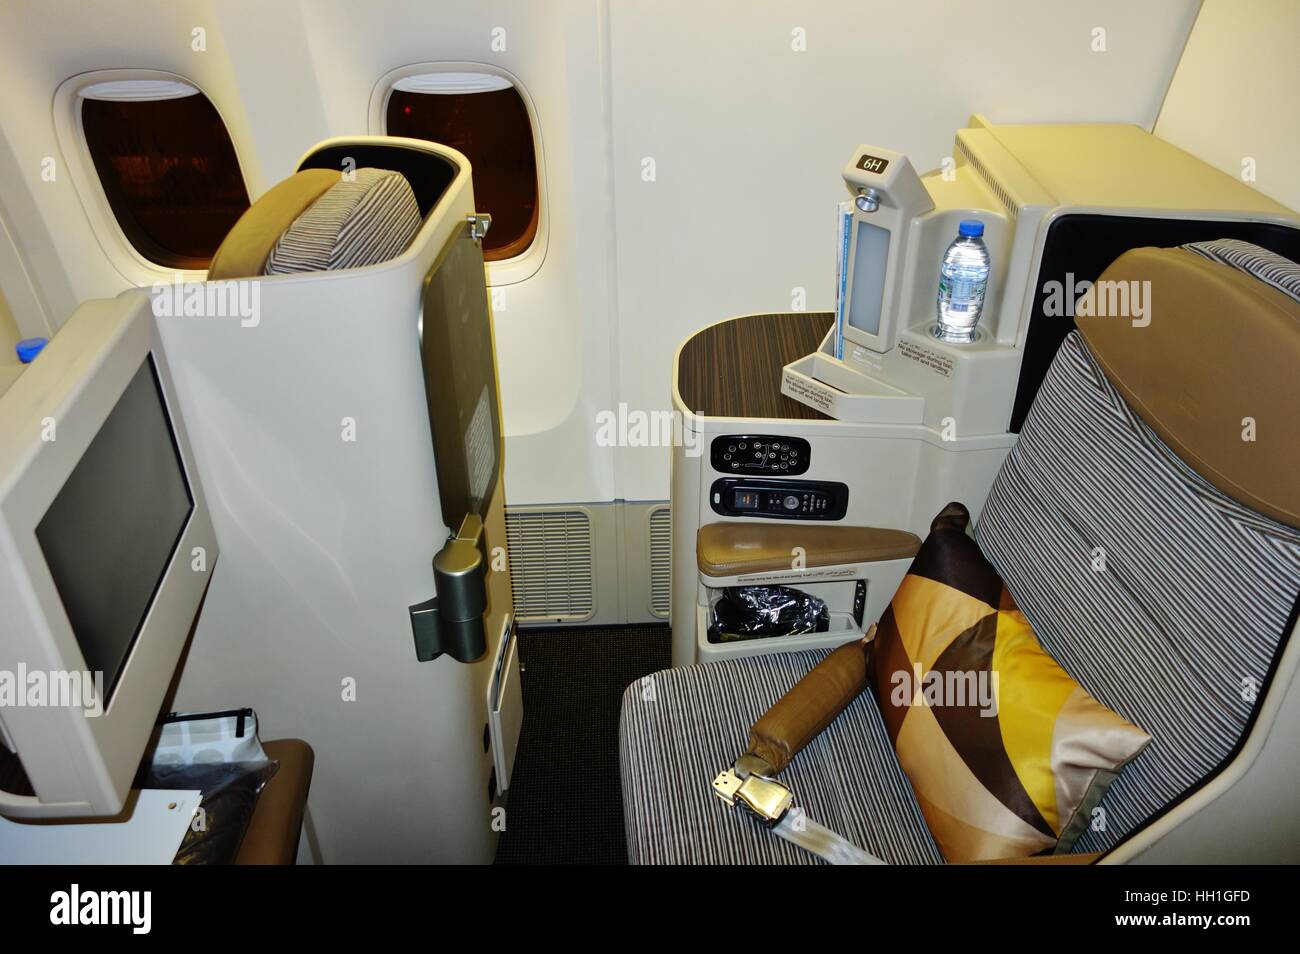 Inside The First Class Cabin On A Boeing 777 From Etihad Airways Ey 9374